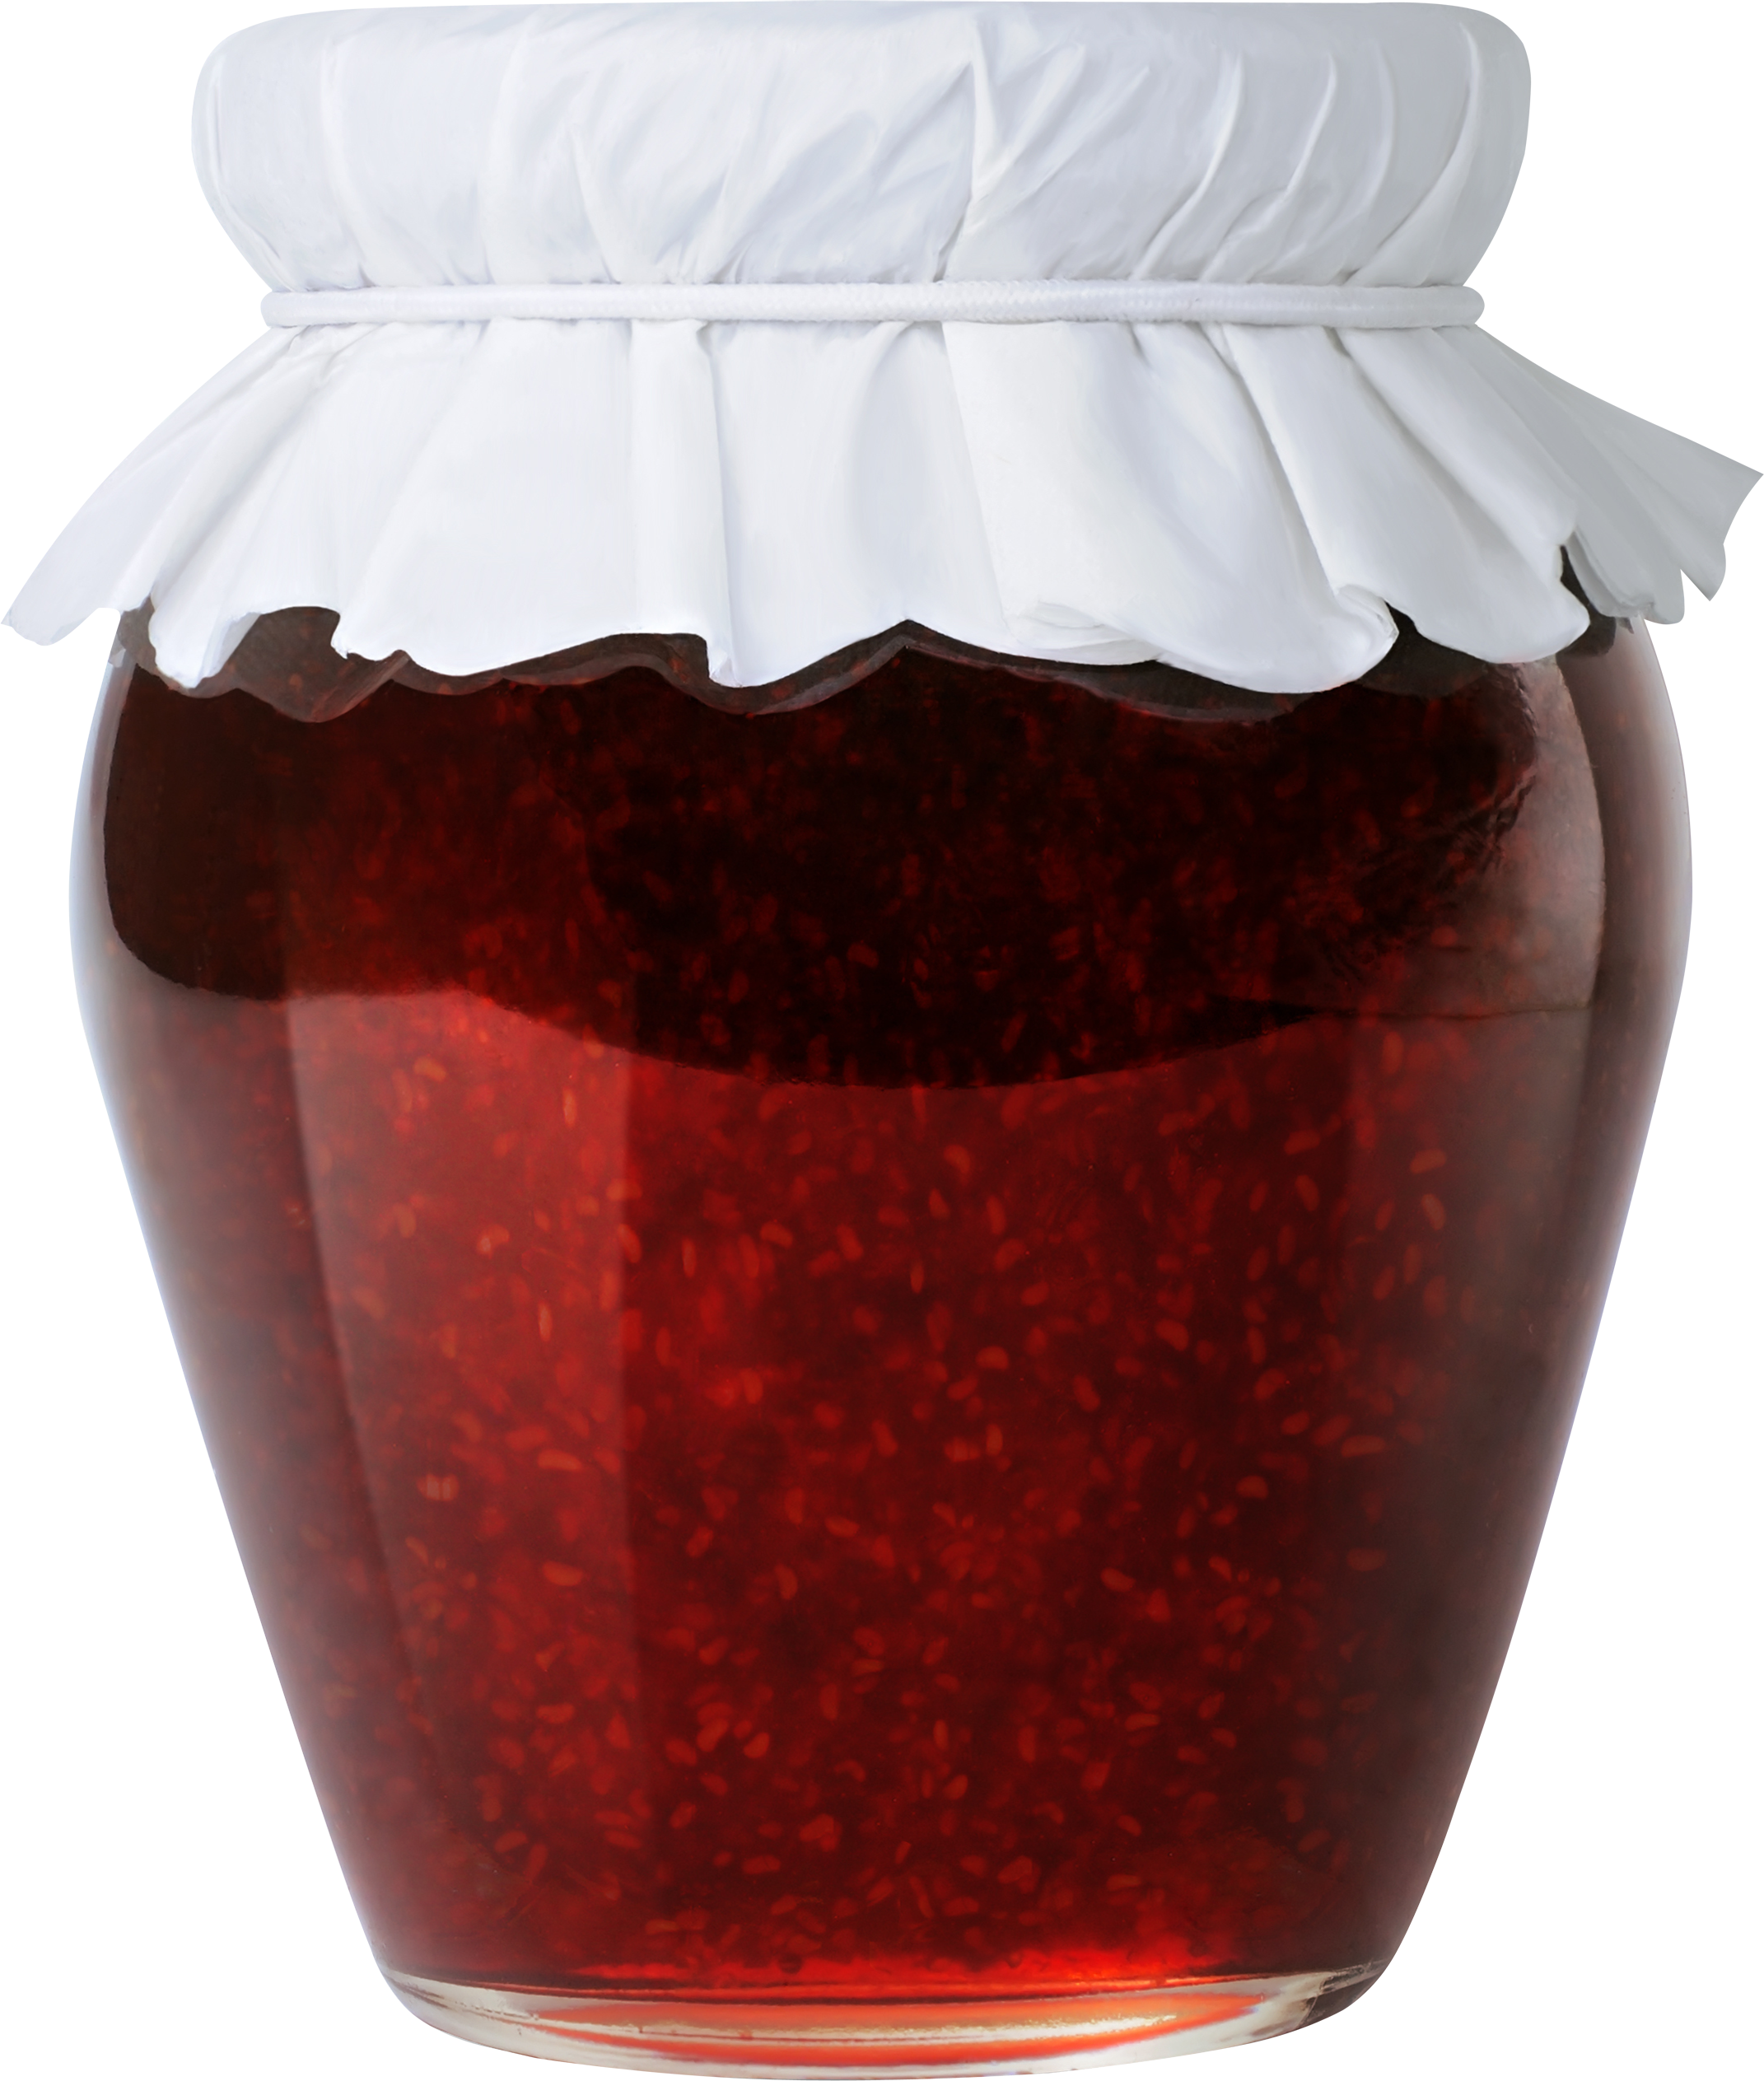 A Jar Of Jam With A White Cover